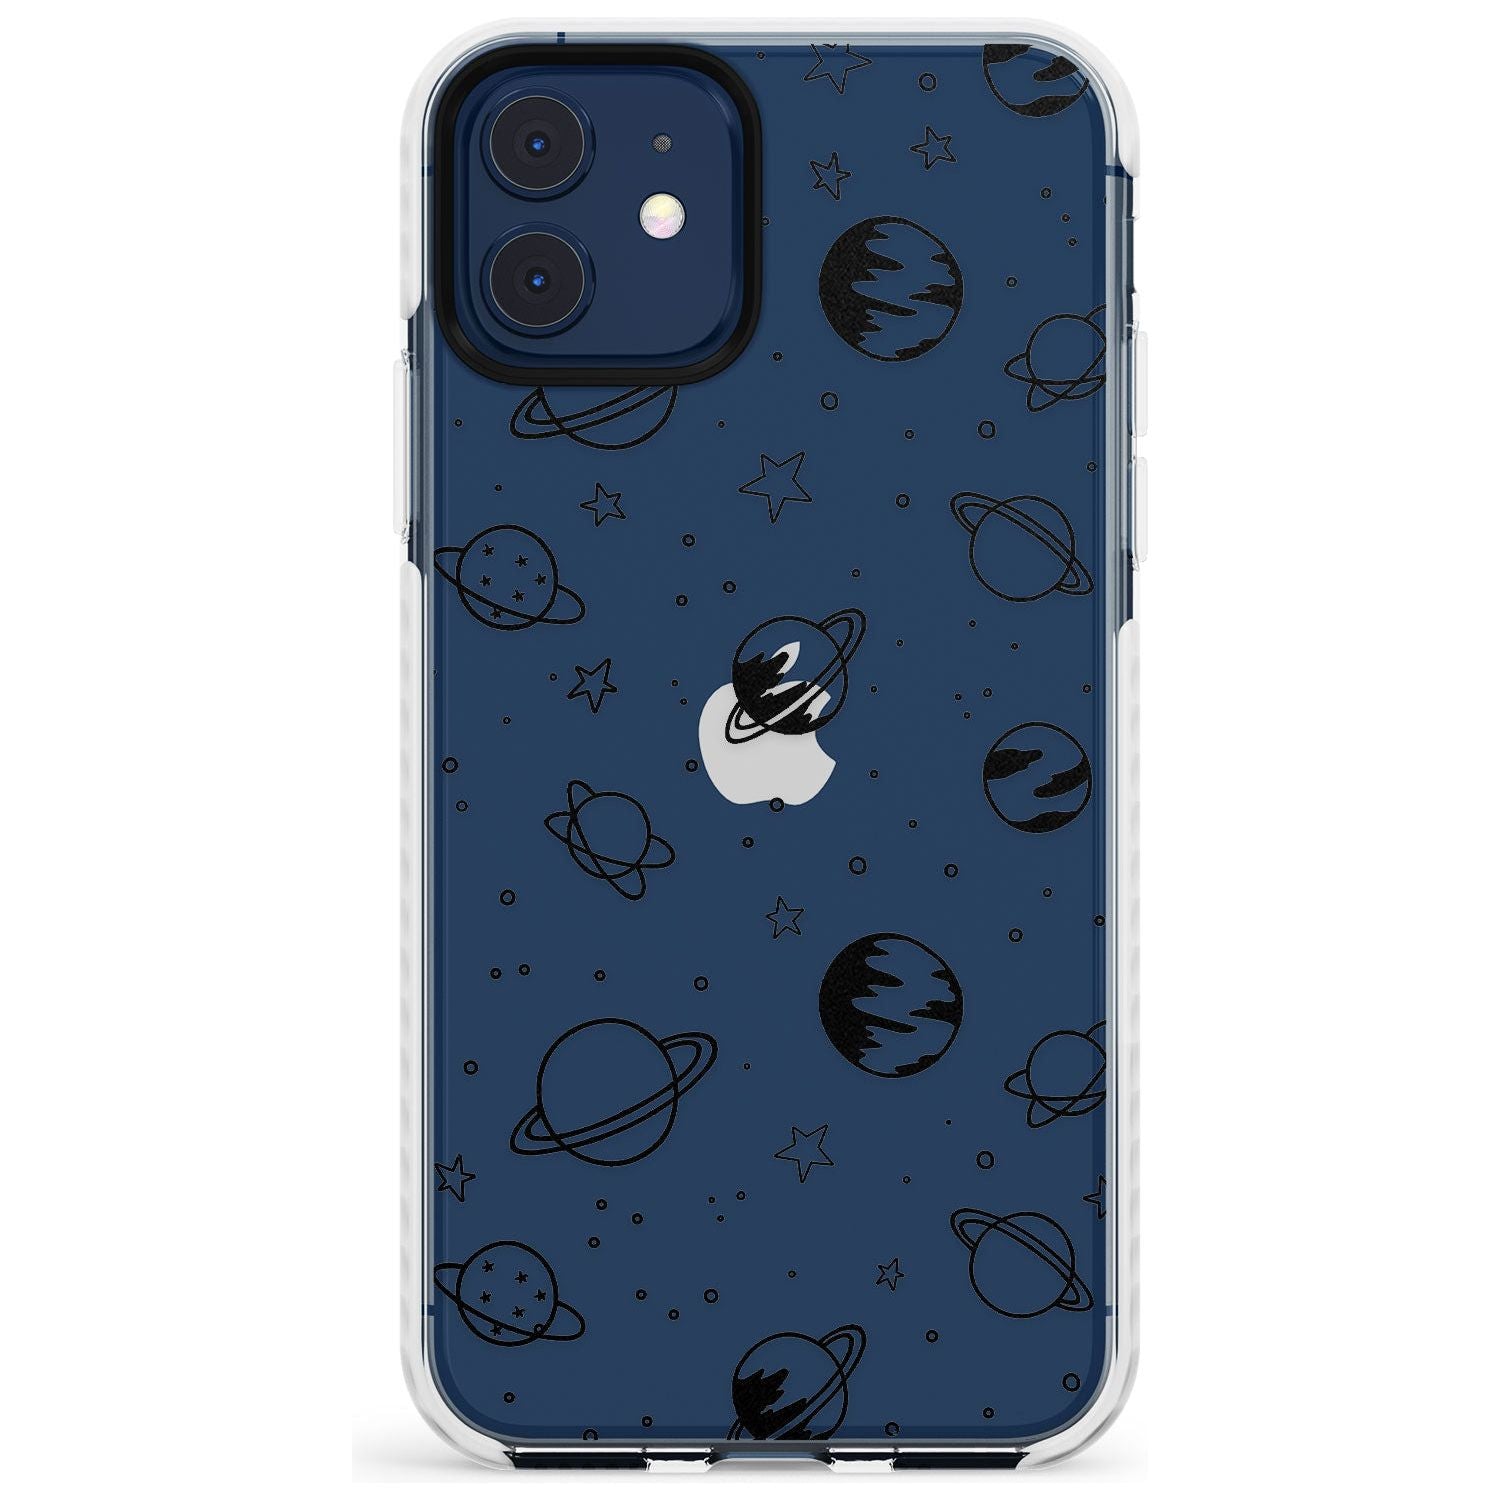 Outer Space Outlines: Black on Clear Slim TPU Phone Case for iPhone 11